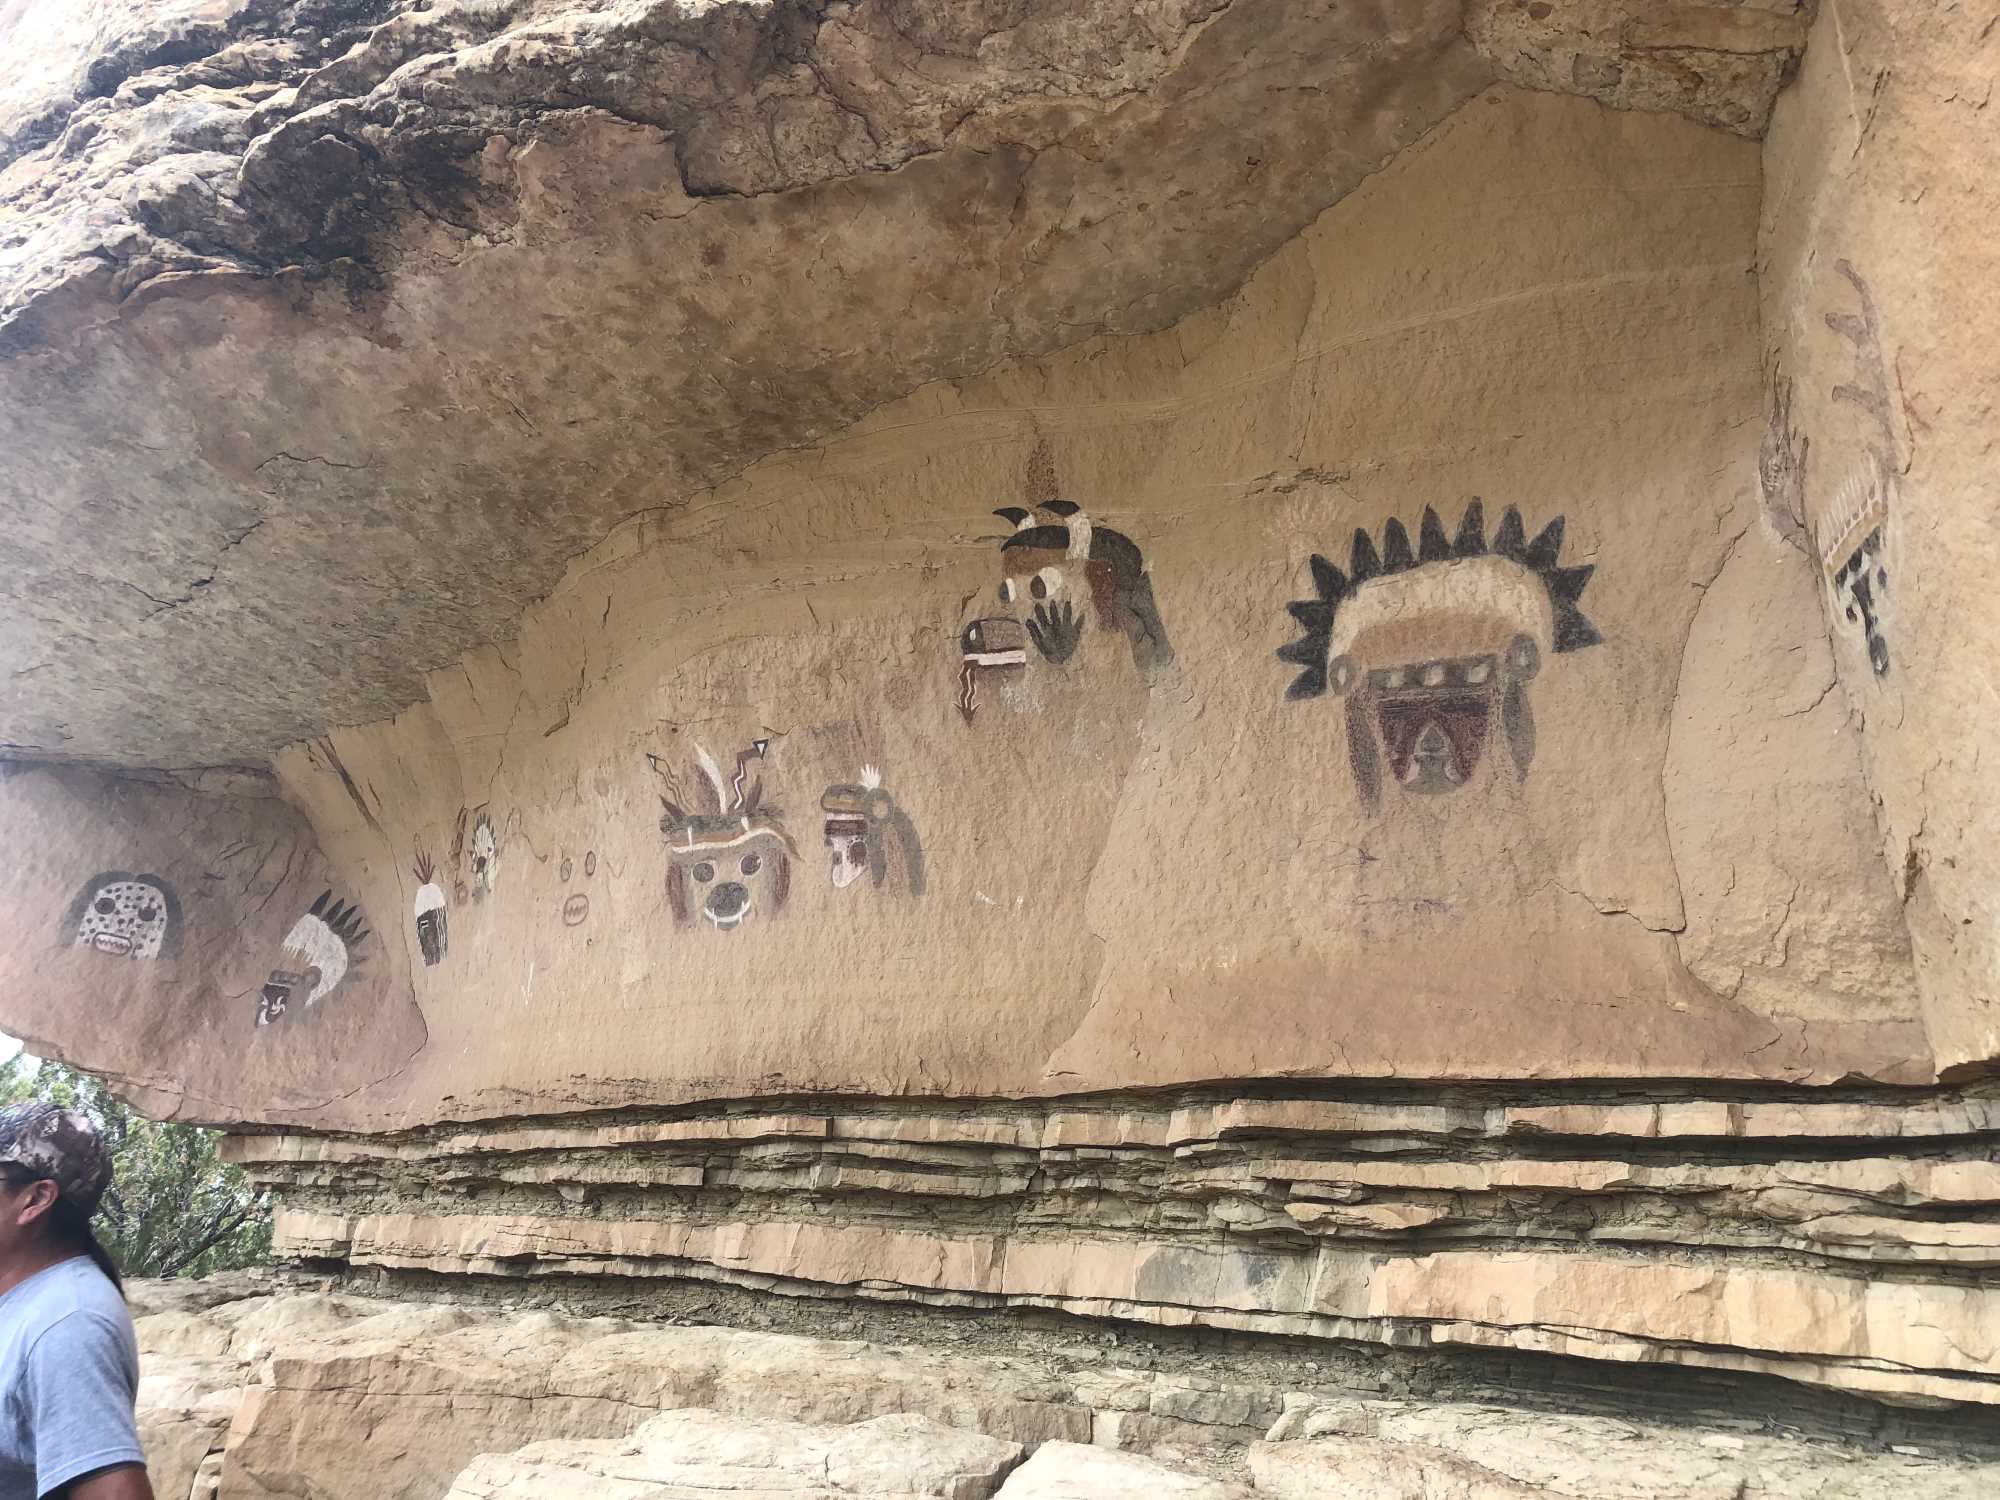 A panel of Zuni pictographs dating to the 1950s and depicting deities and beings embodying animals. This is a stop on an official tour of the Village of Many Kivas, here led by Zuni guide Kenny Bowekaty in June 2022. Image: Totsoni Willeto